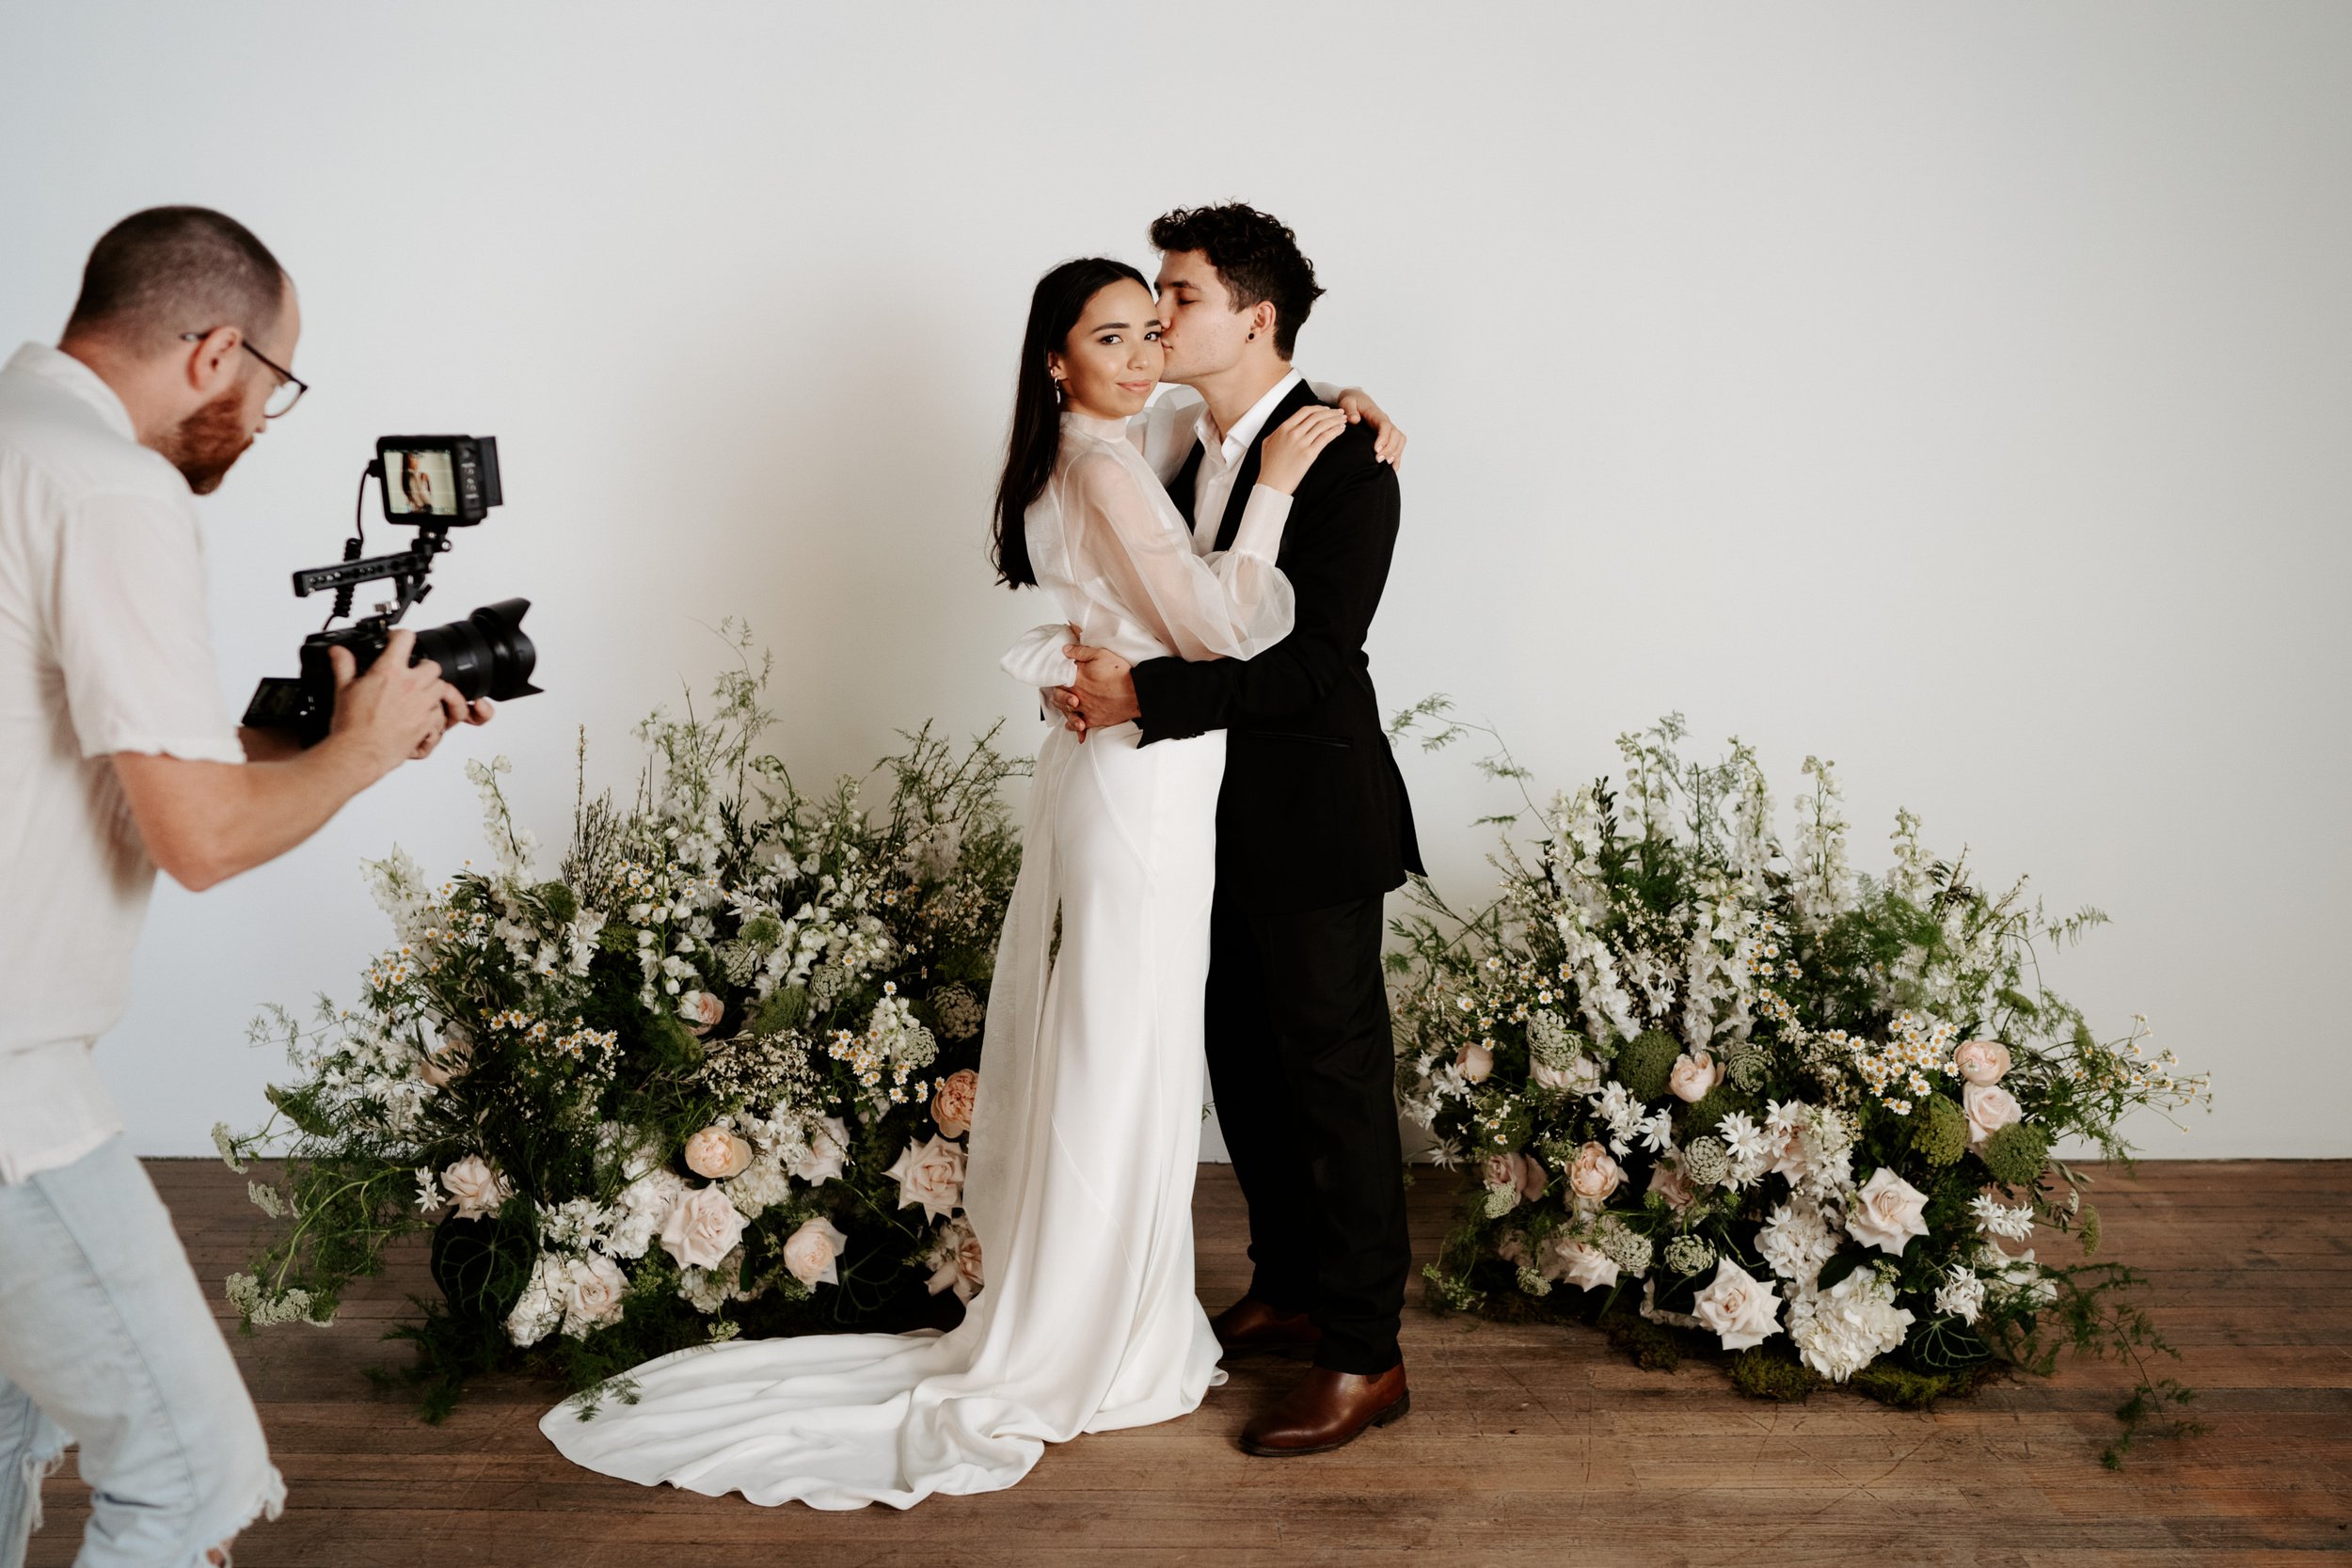 Photoshoot behind the scenes - Brisbane Spring Wedding Inspiration - Trent and Jessie Photography and Videography